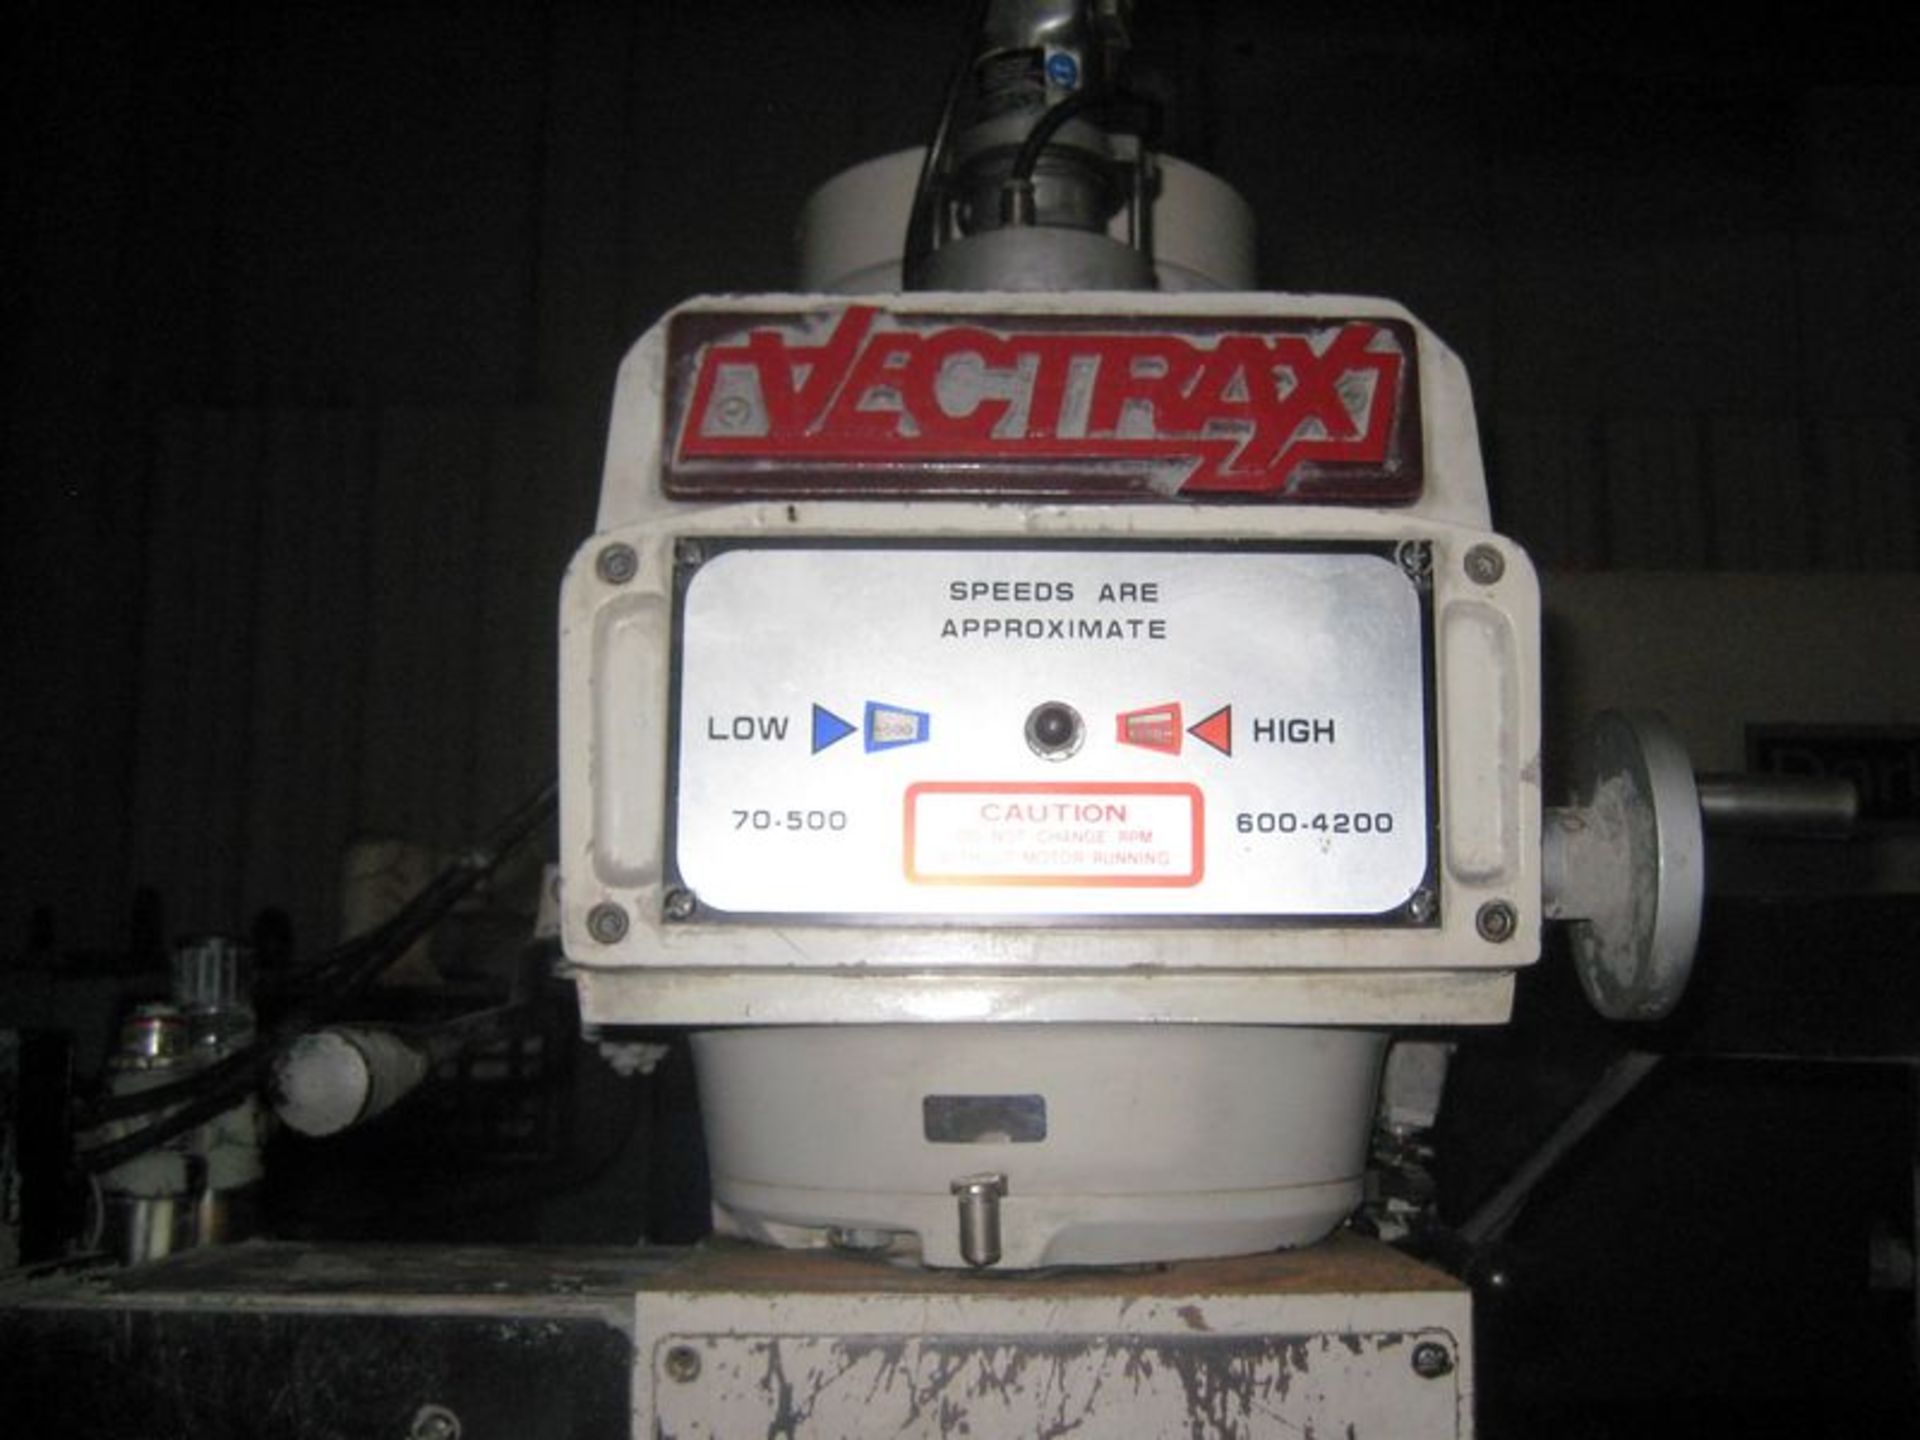 Vectrax GS-N16V 3-Axis CNC Knee Type Milling Machine, S/N 9030192NV, New 2001 General - Image 3 of 5